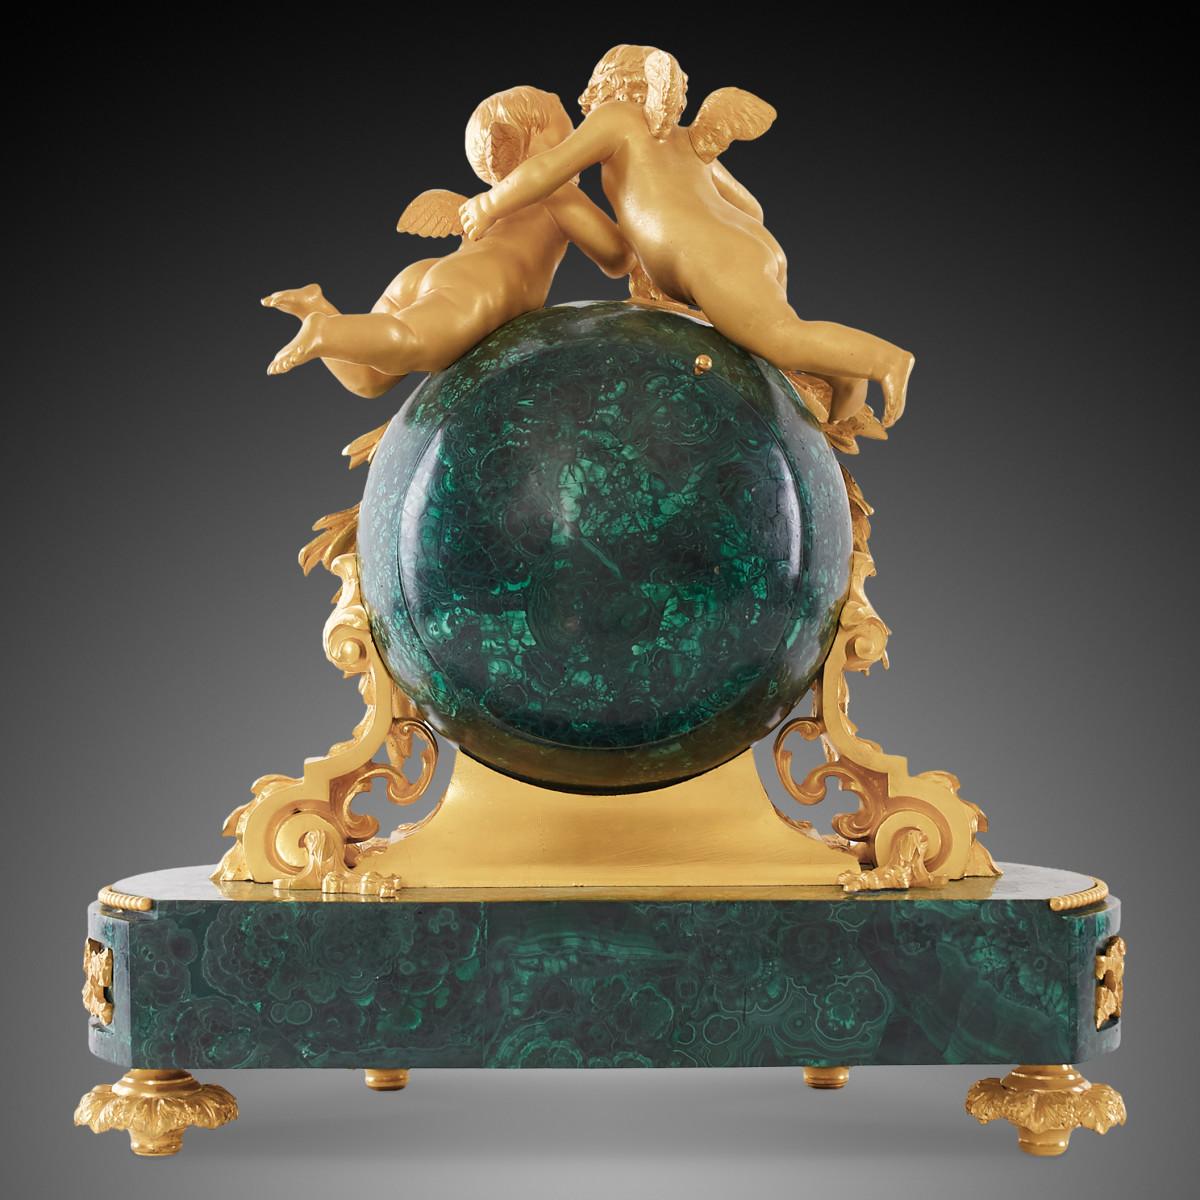 Gilt BY E.DUMOULINEUF À PARIS A of mantel clock in the style of Louis XVI, the 19th c